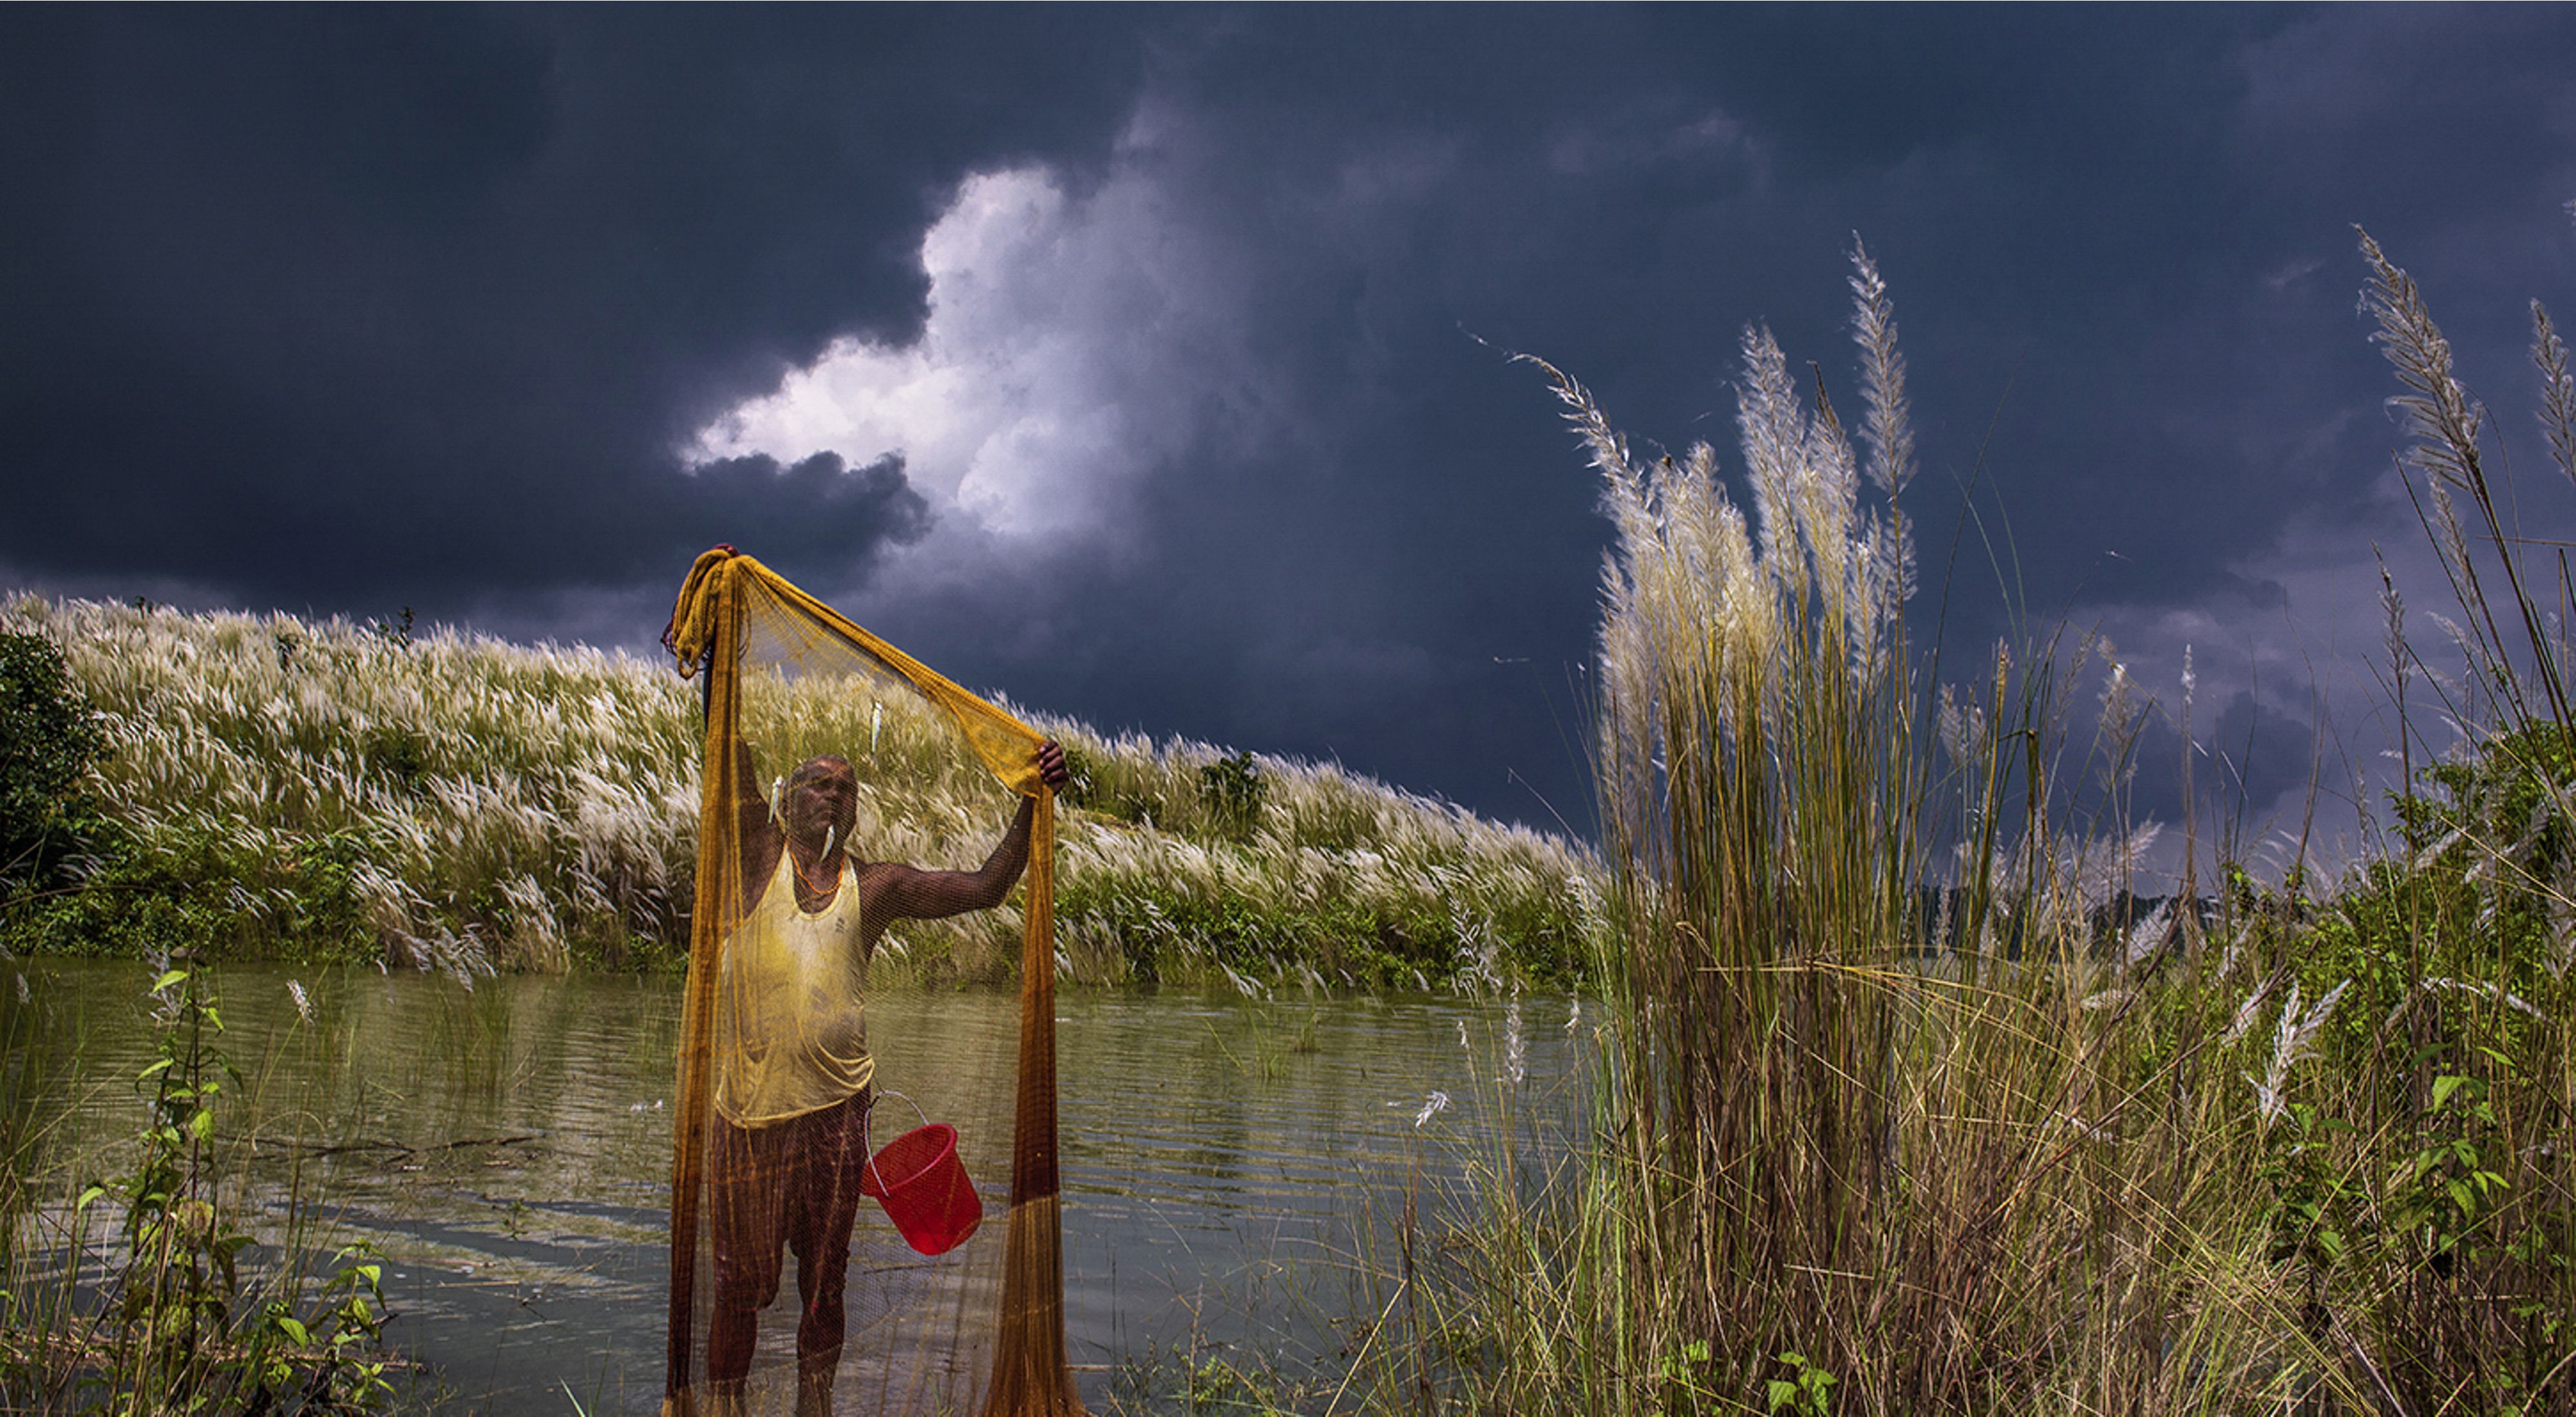 searches his net while storm clouds gather 